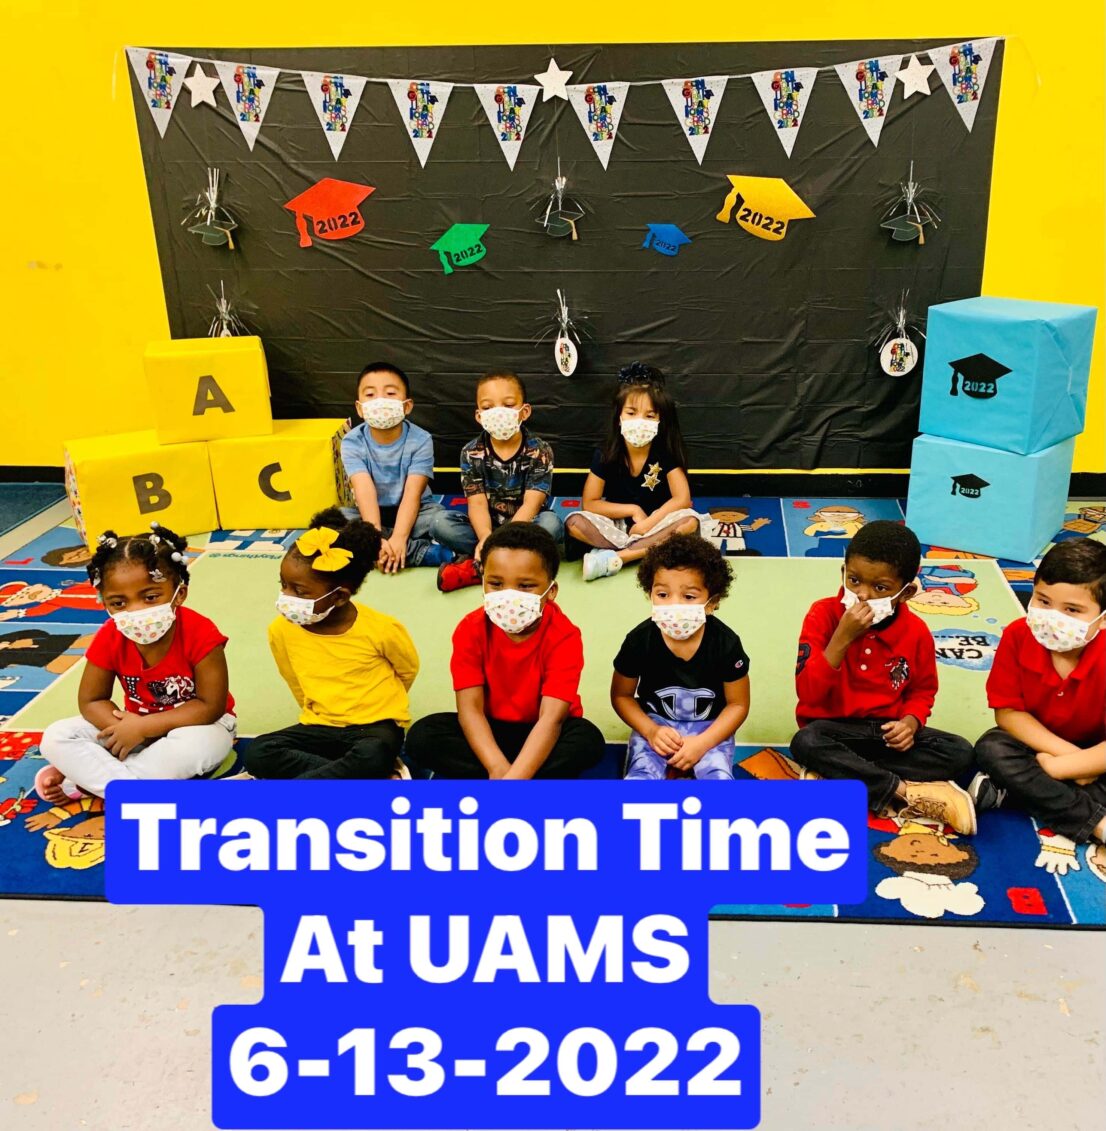 Children sit in two rows on a rug with a decorative background and the caption Transition Time at UAMS 6-13-2022